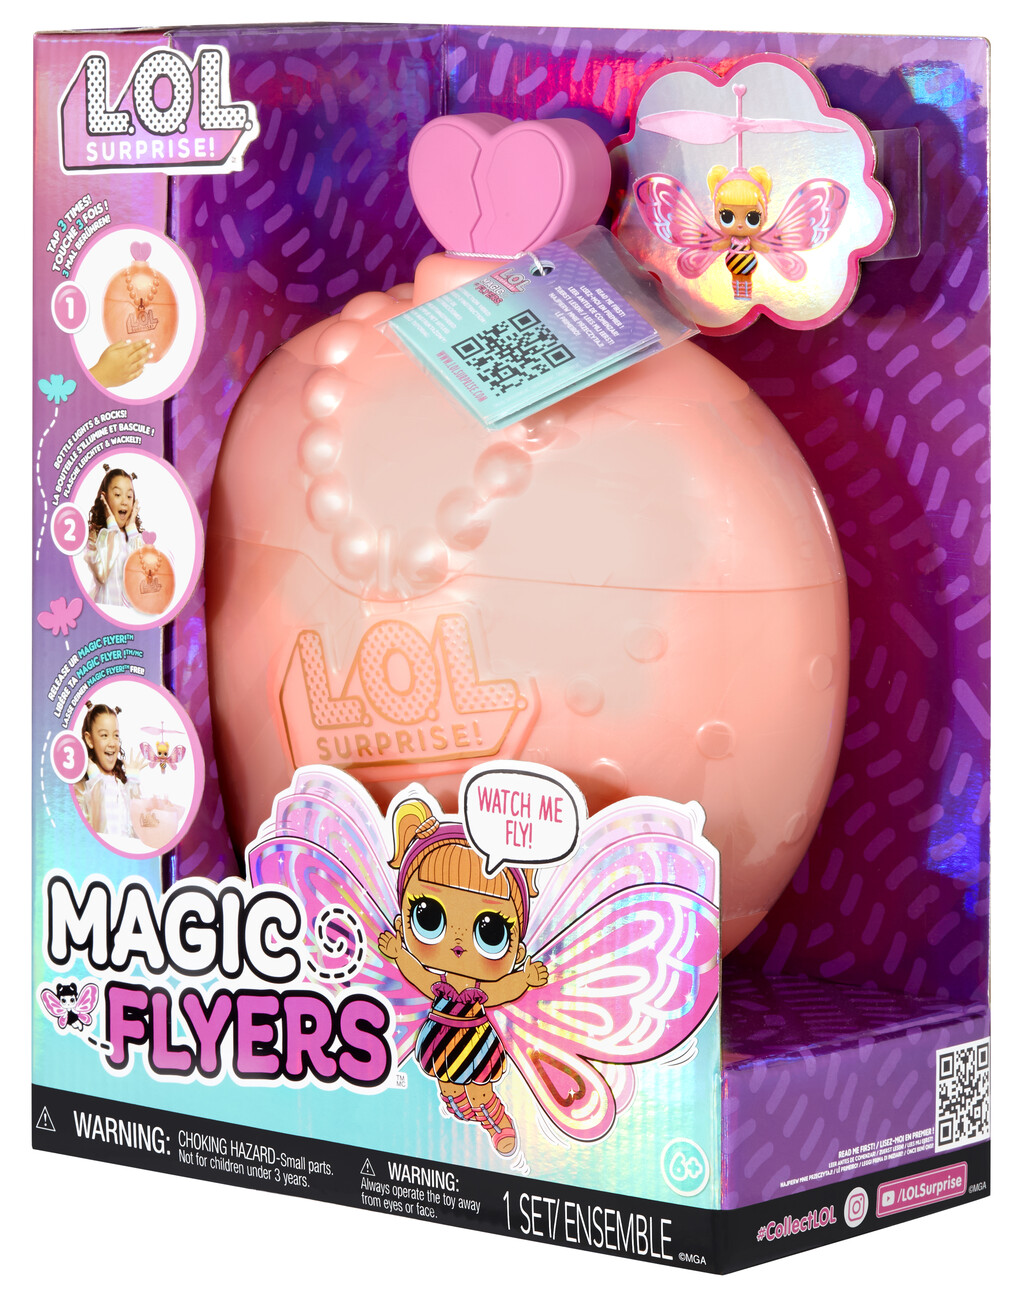 Toy L.O.L. Surprise Magic Flyers - Flutter Star (Pink Wings)